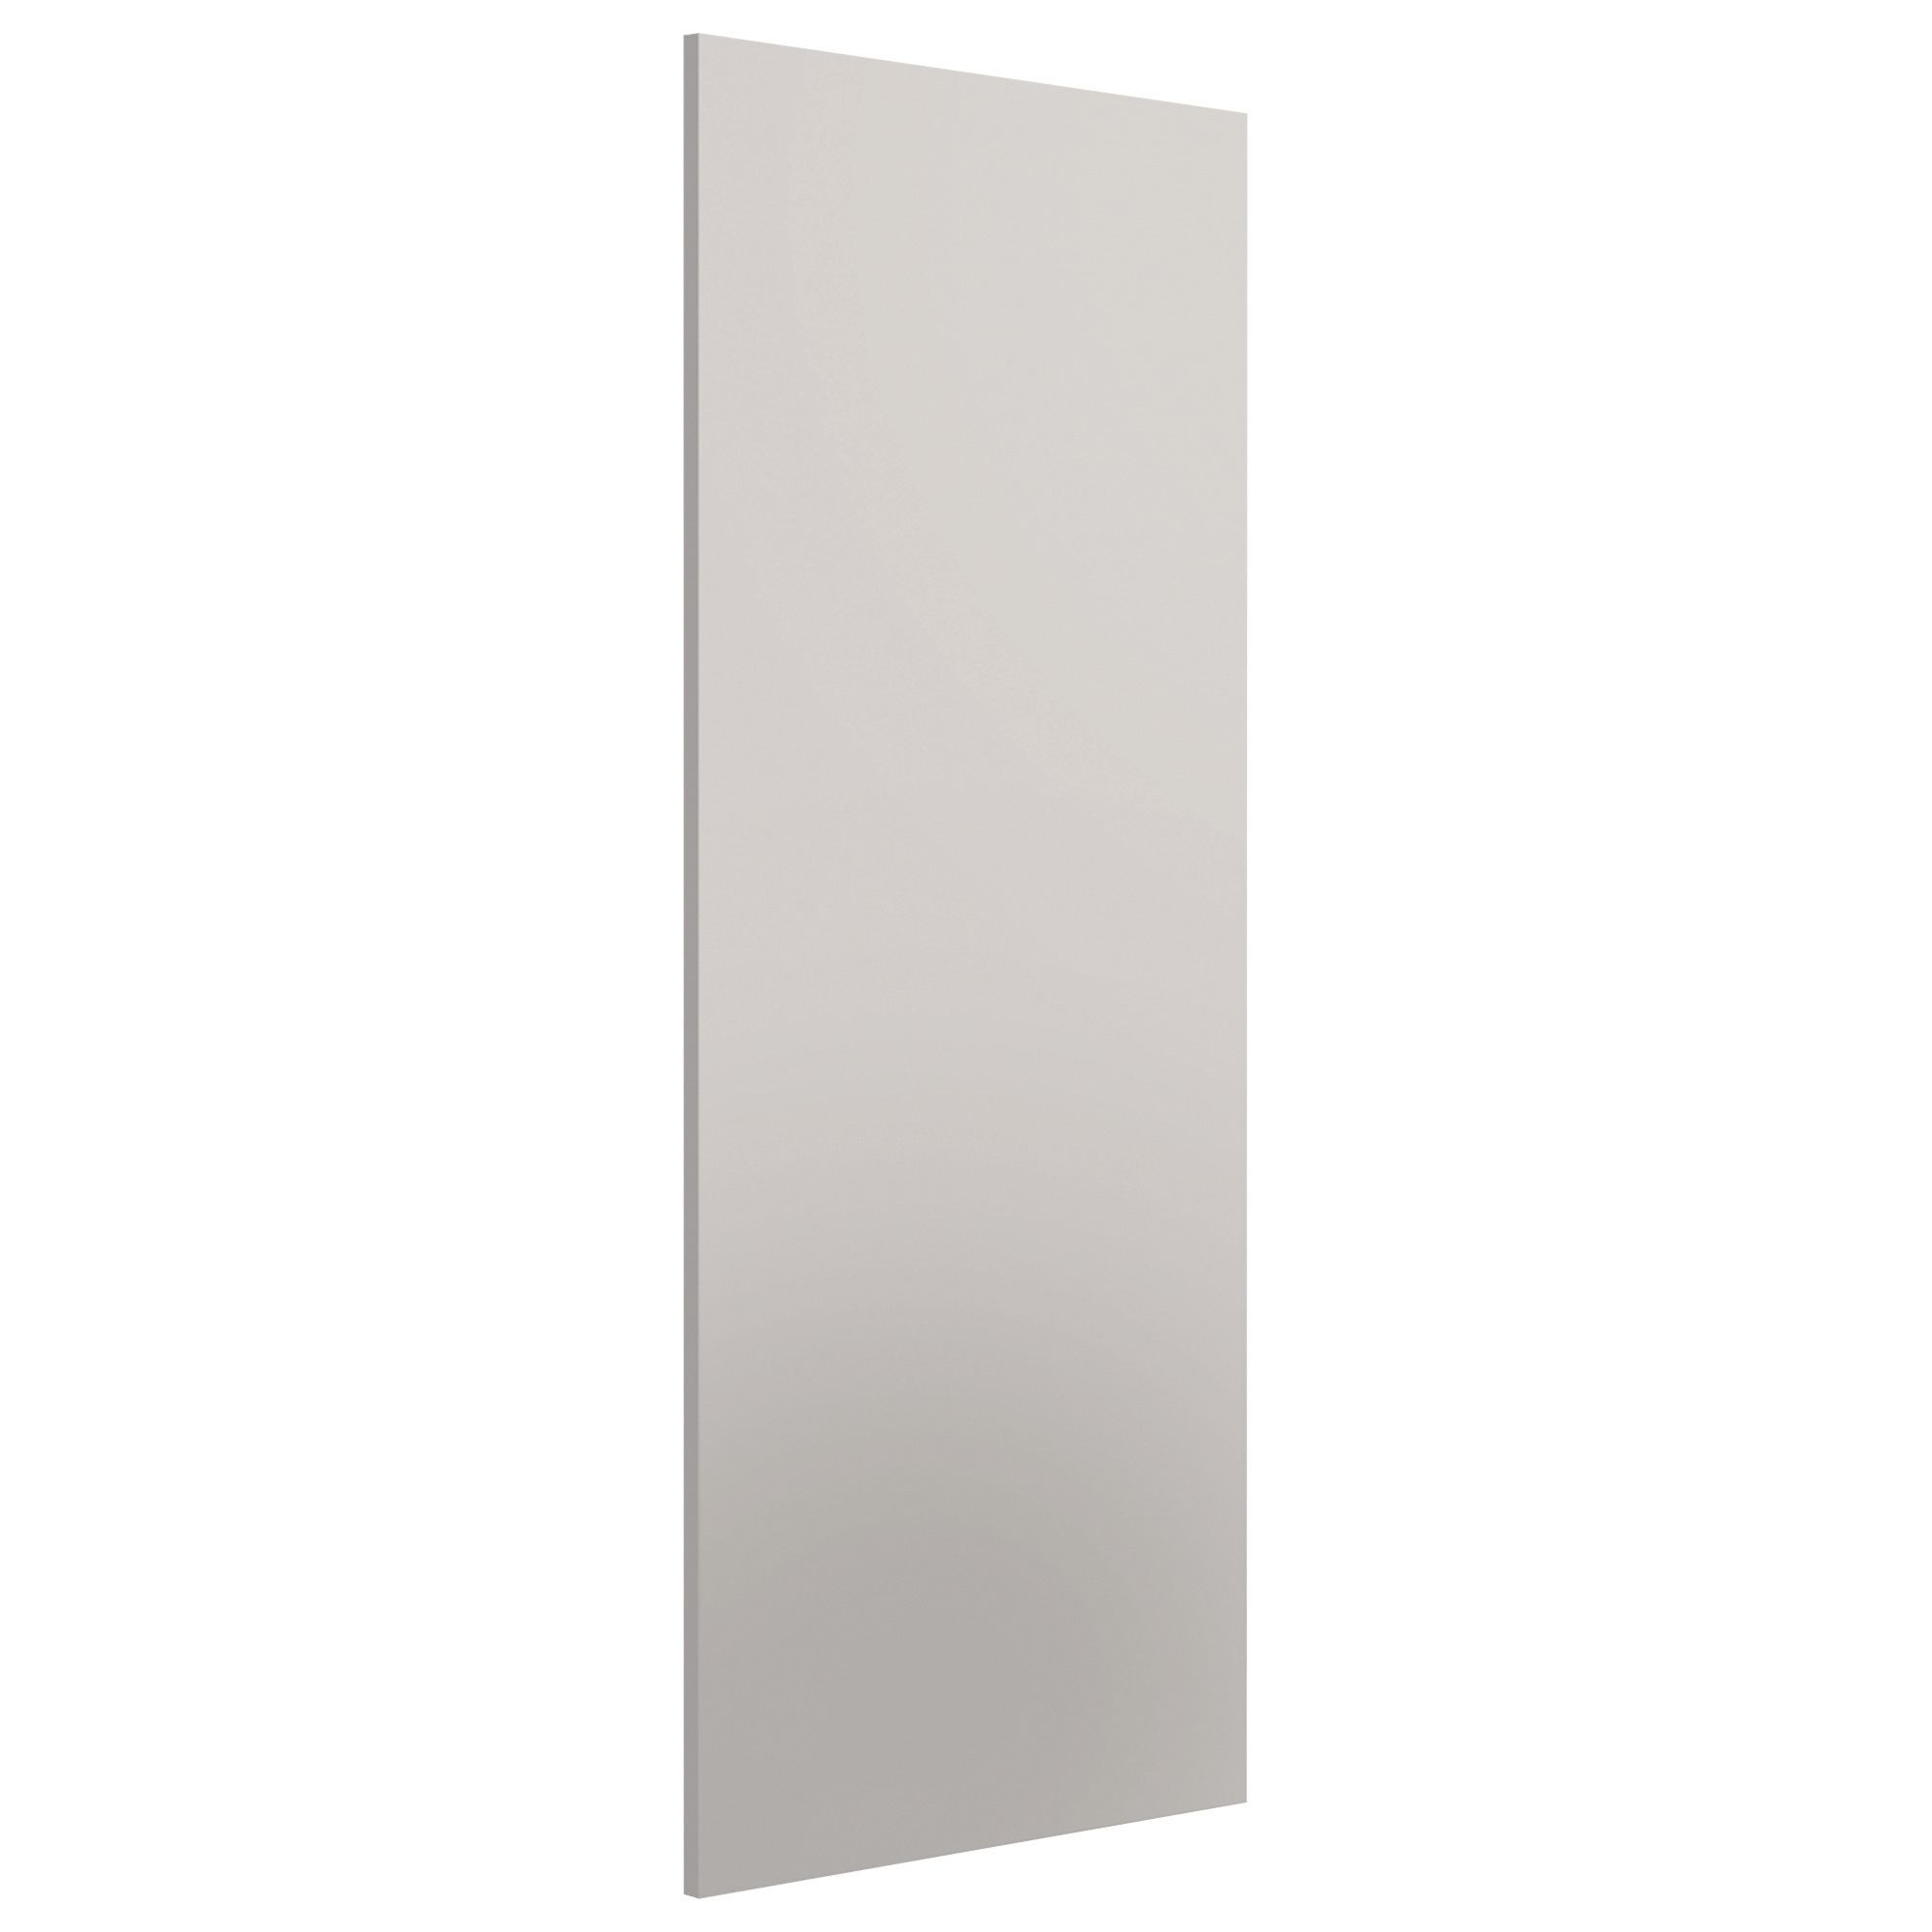 Image of Spacepro Wardrobe End Panel Cashmere - 2800mm x 620mm x 18mm with Fixing Blocks